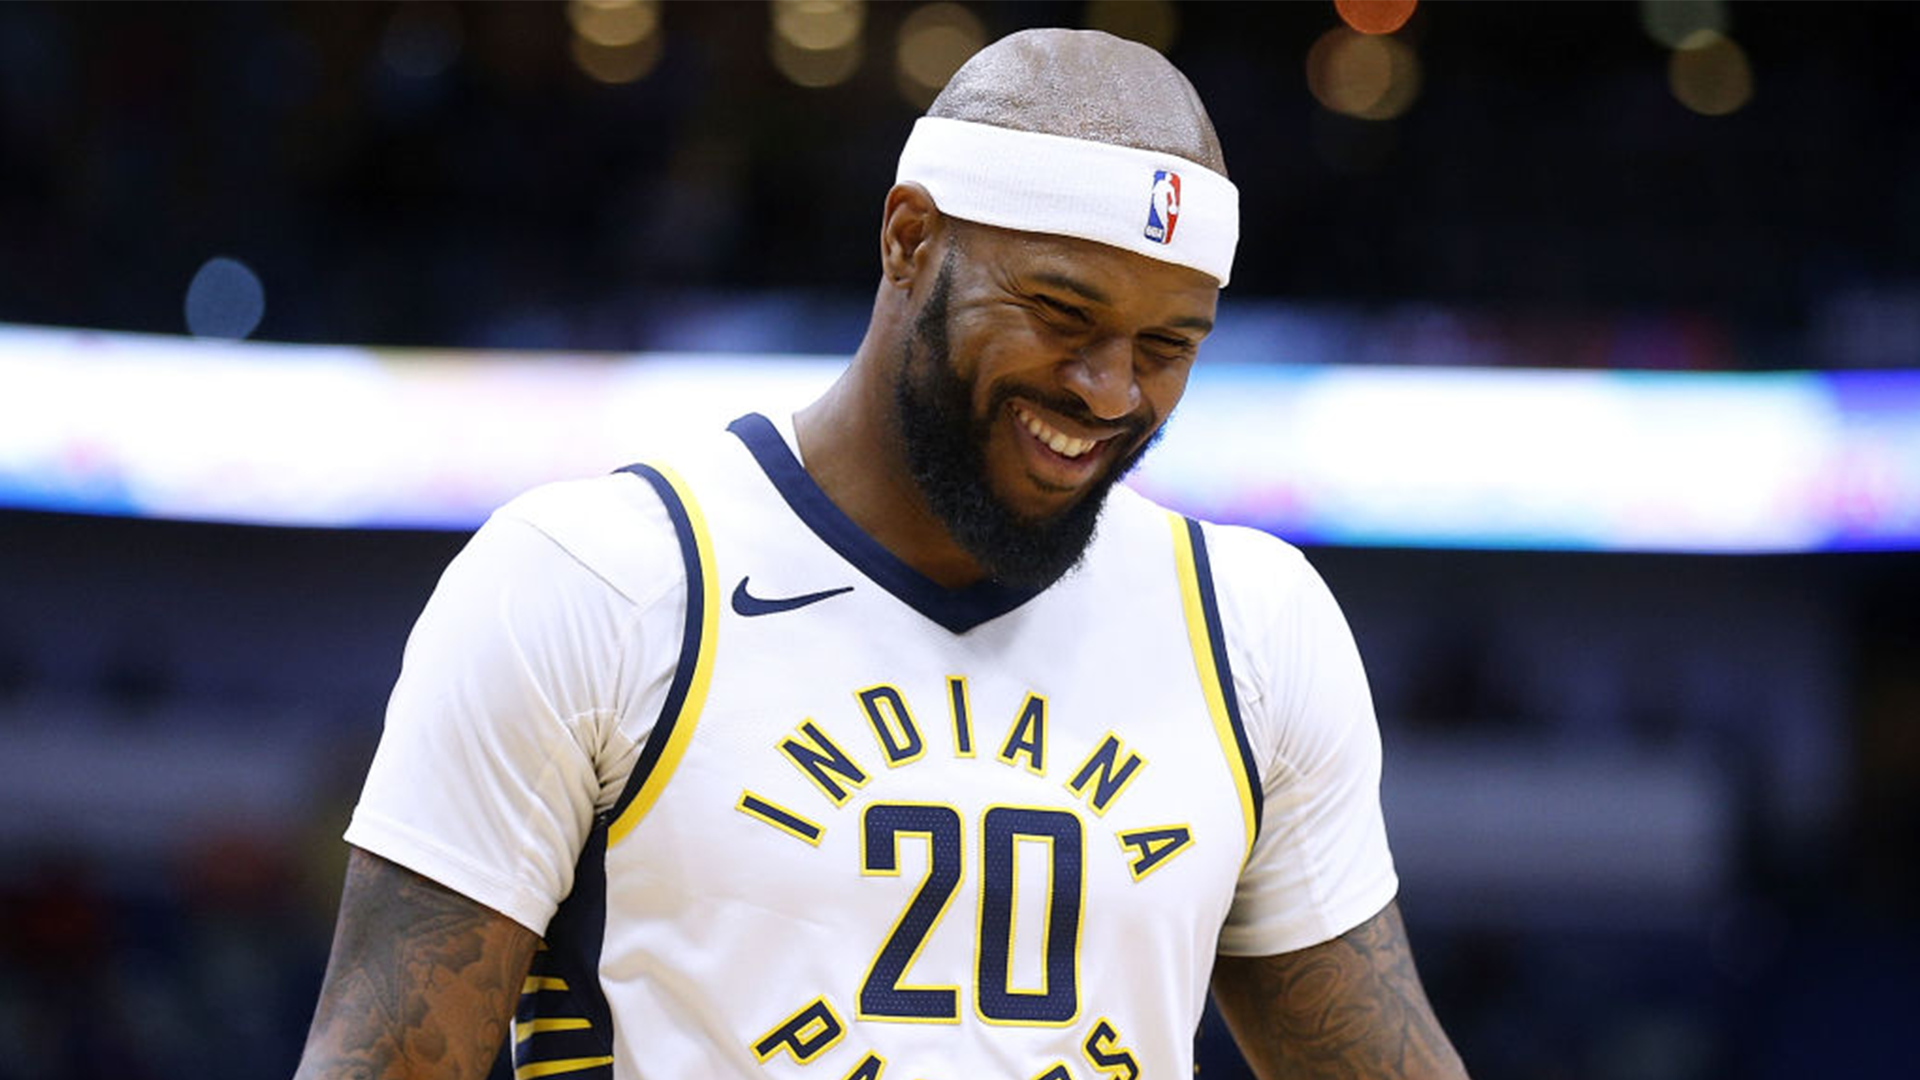 How Former NBA Player Trevor Booker Turned A Training Camp Into An International Boarding School